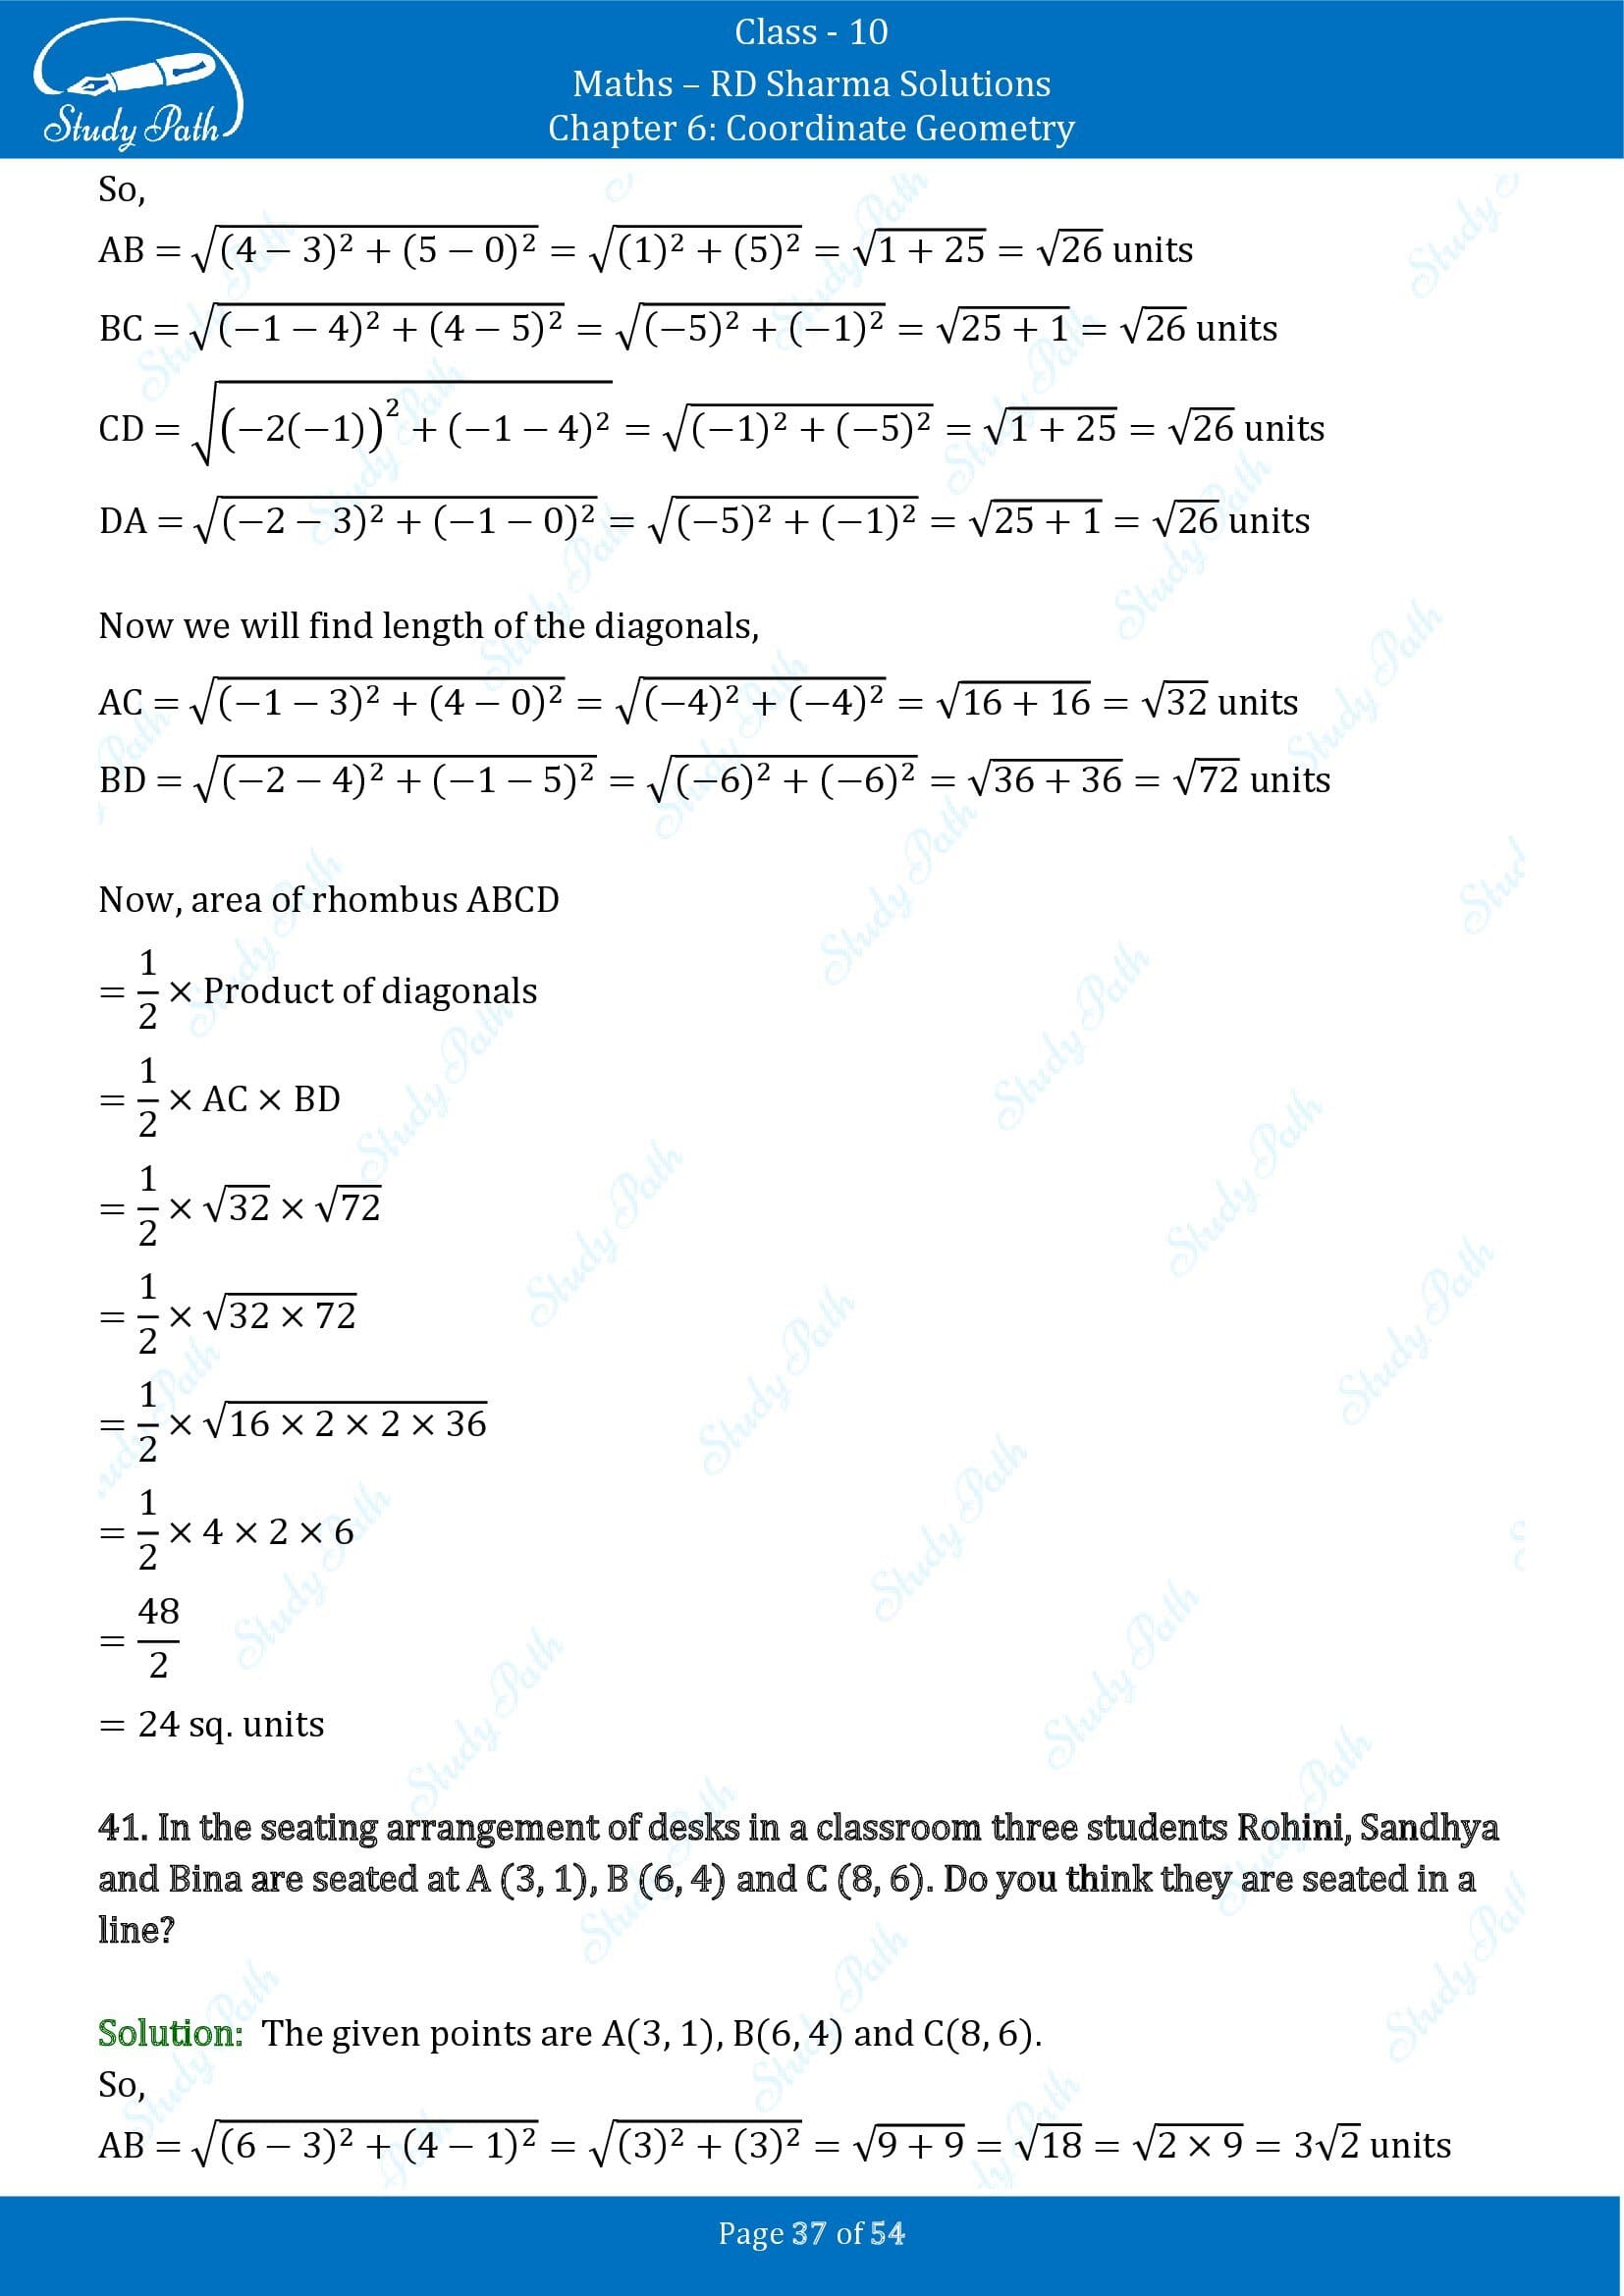 RD Sharma Solutions Class 10 Chapter 6 Coordinate Geometry Exercise 6.2 0037